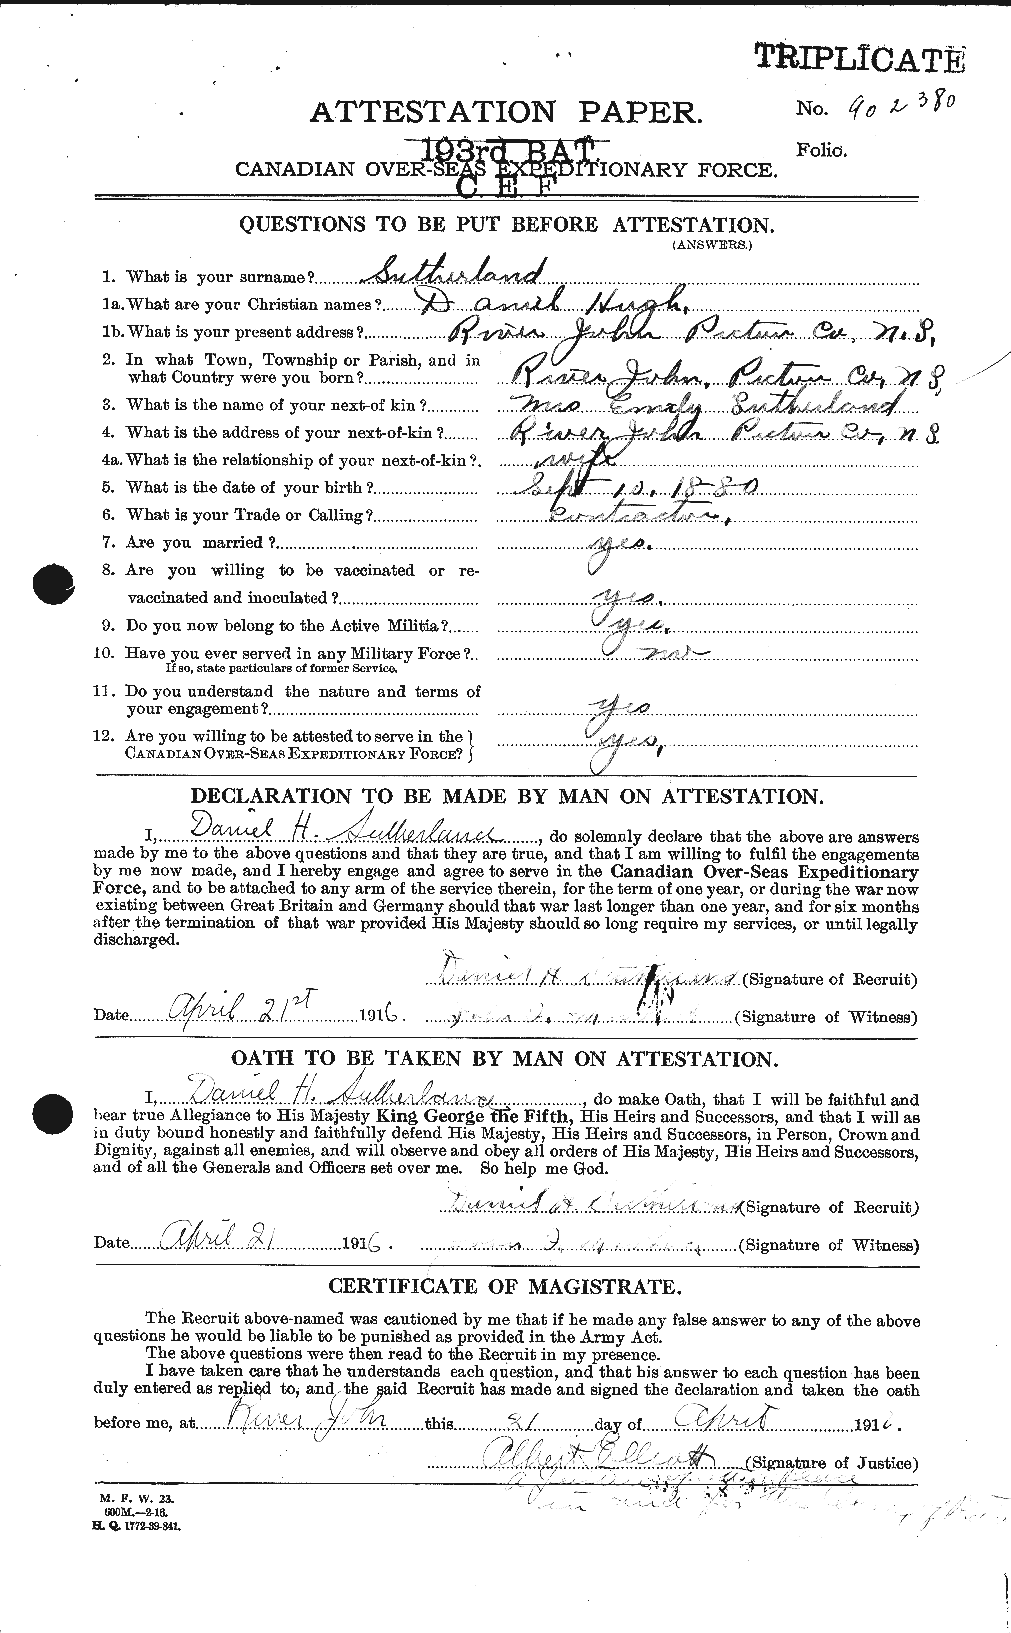 Personnel Records of the First World War - CEF 124949a